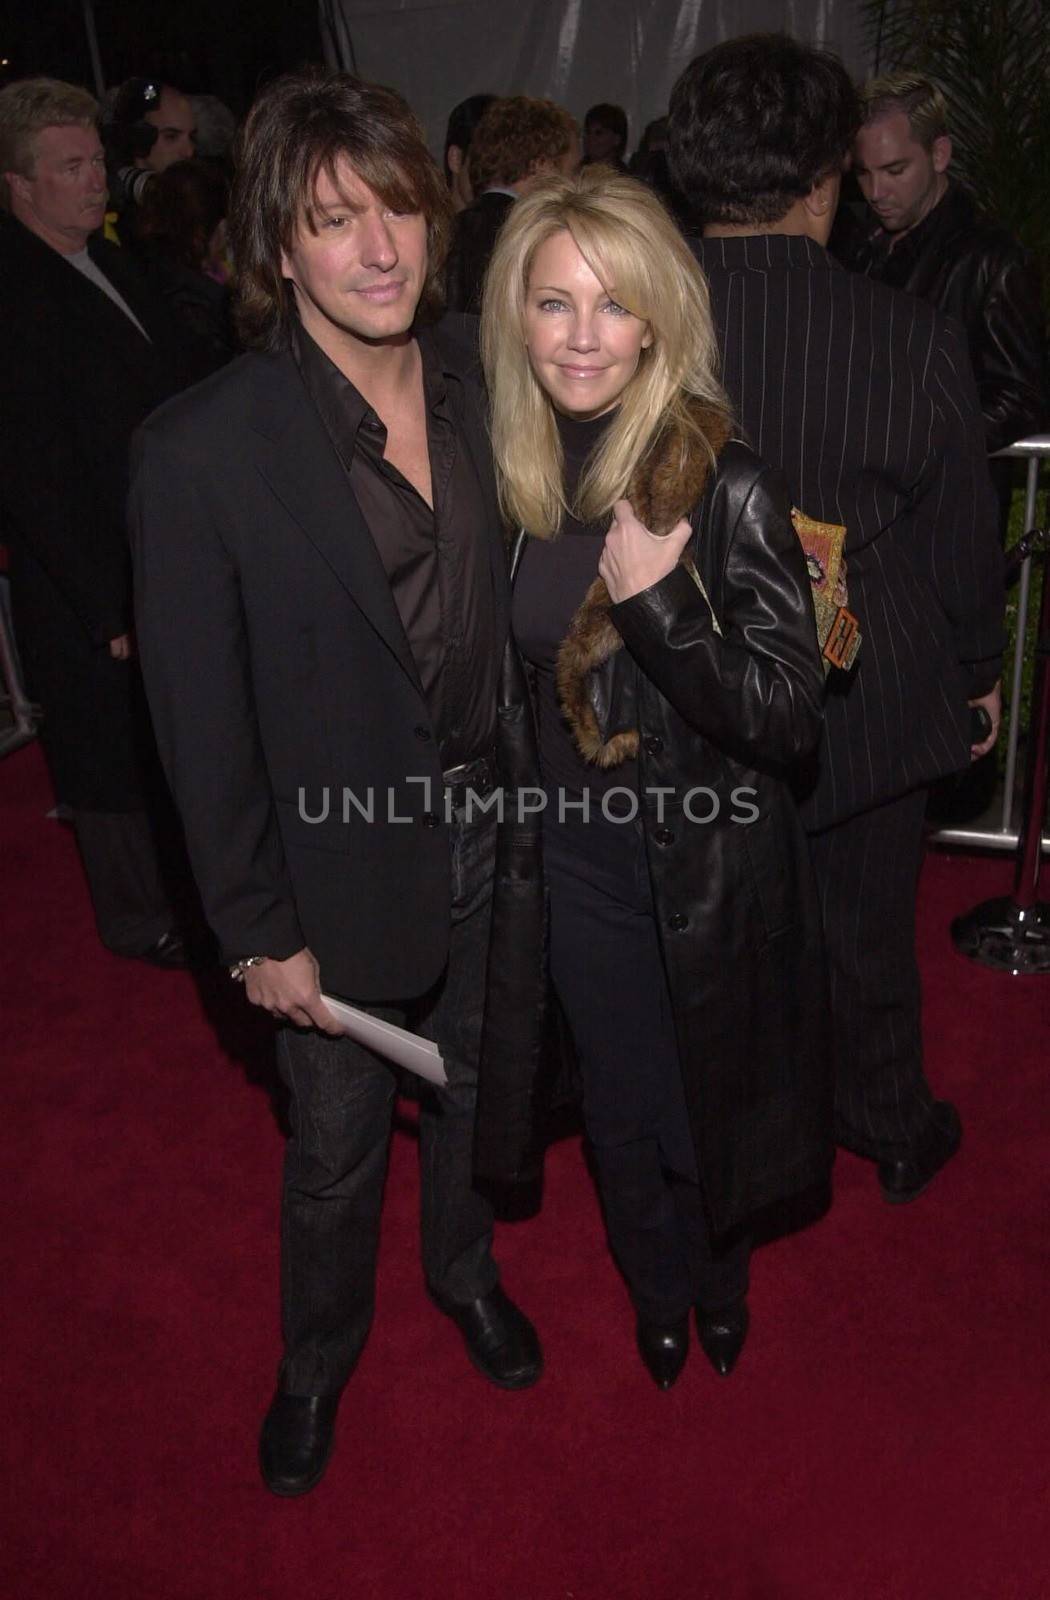 Richie Sambora and Heather Locklear at the premiere of Universal's "U-571" in Westwood, 04-17-00